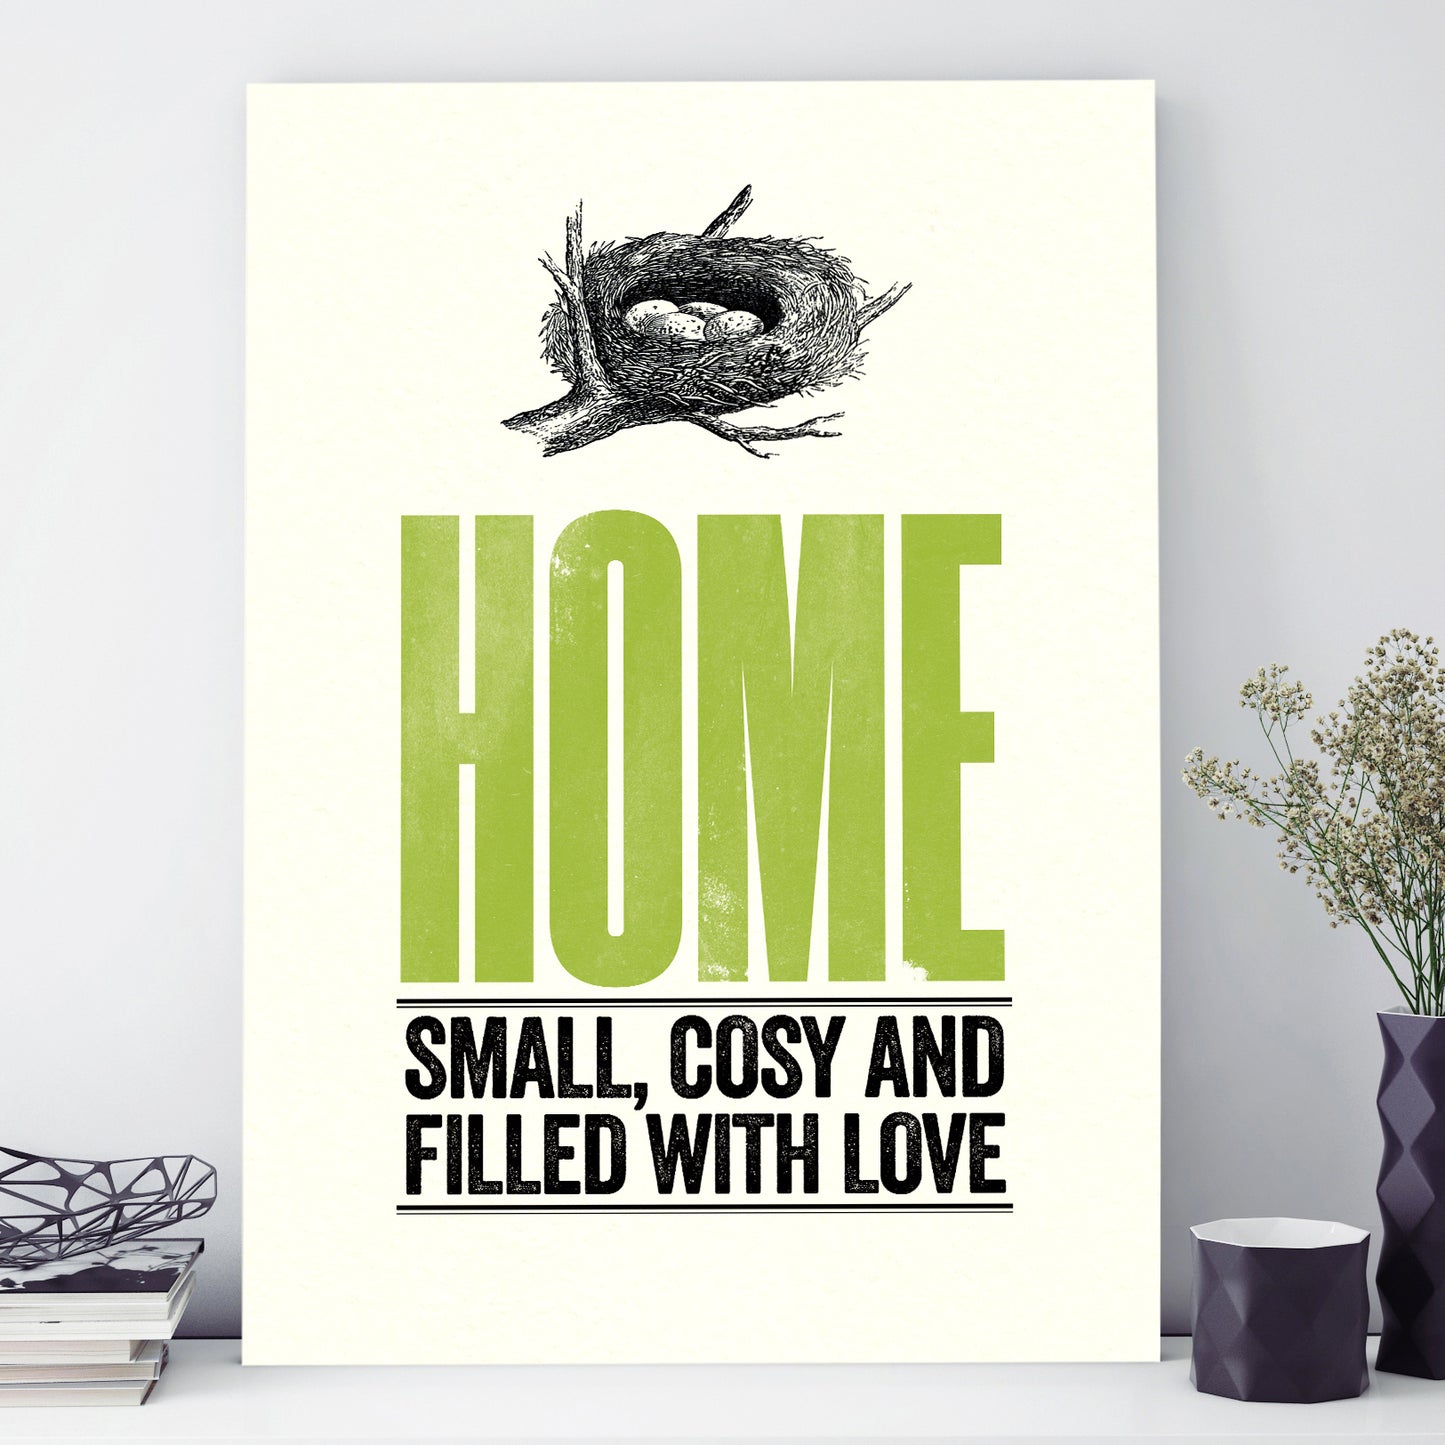 Modern Life A3 print: Filled With Love